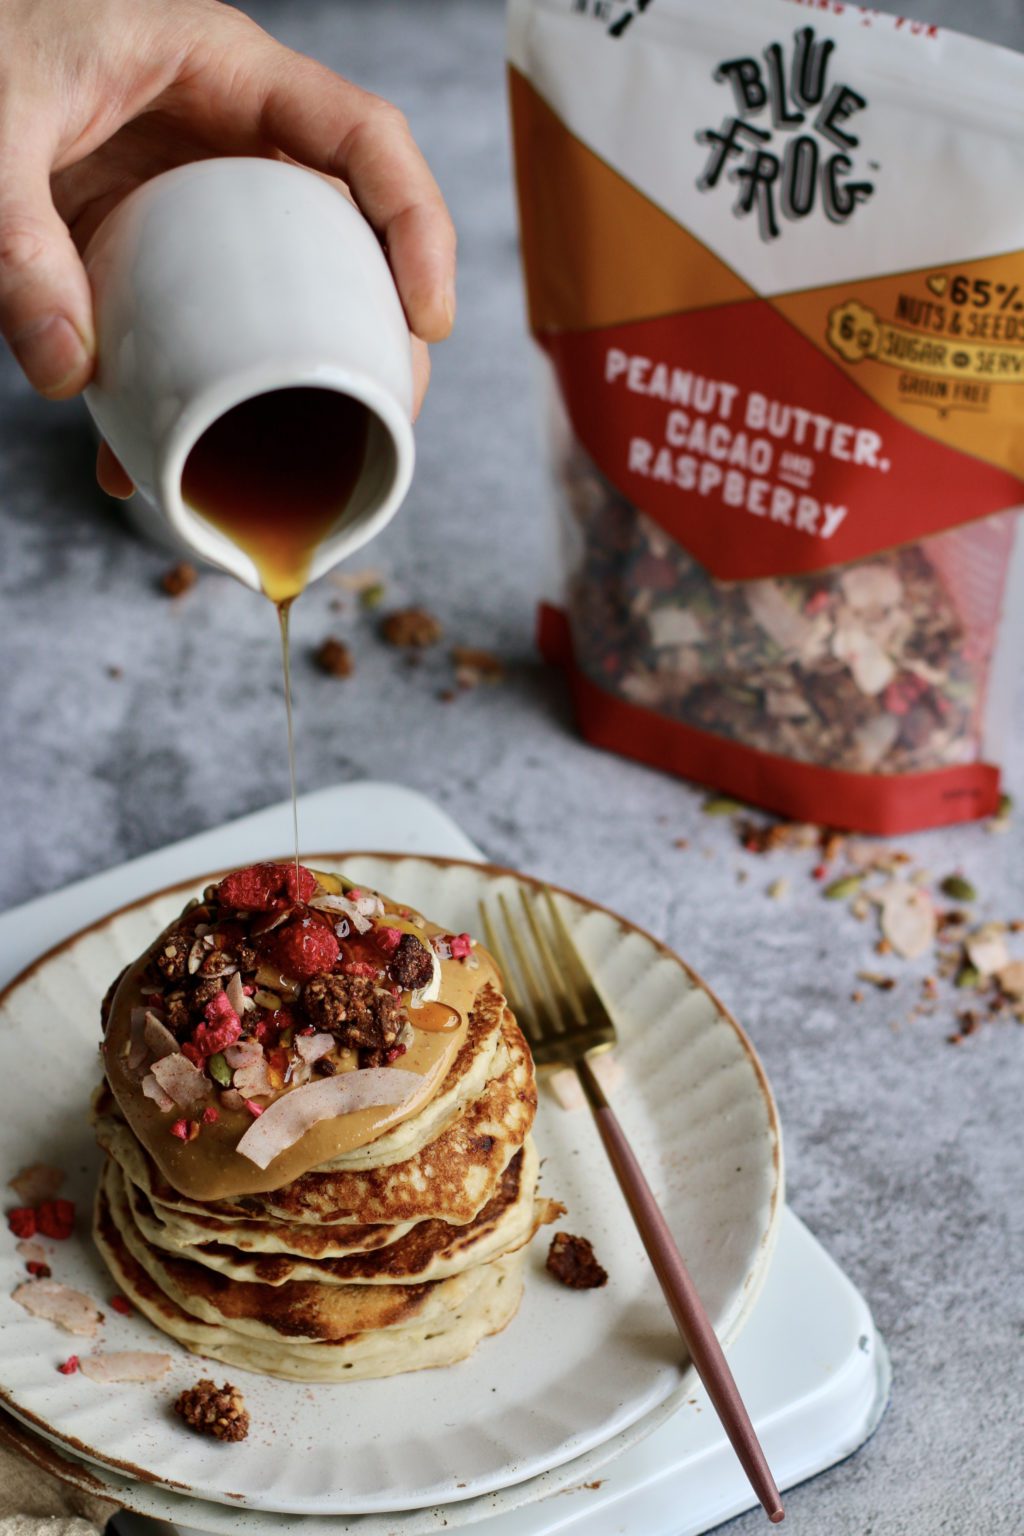 Crunchy Peanut Butter, Cacao and Raspberry Pancakes